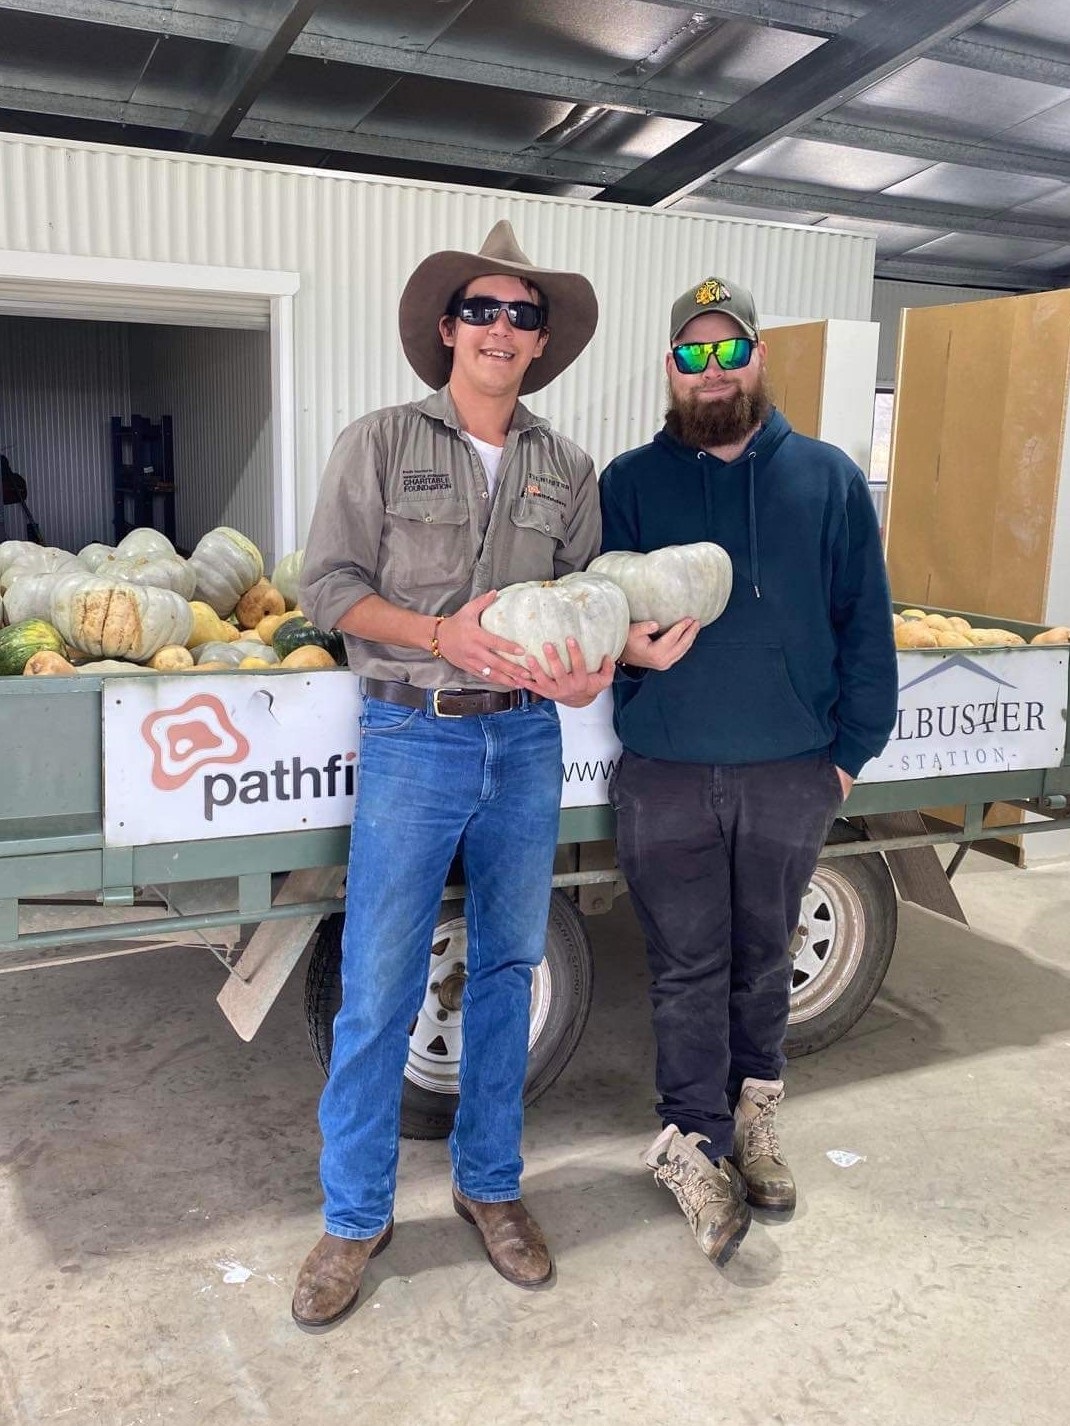 Two man holding pumpkins from Tilbuster station